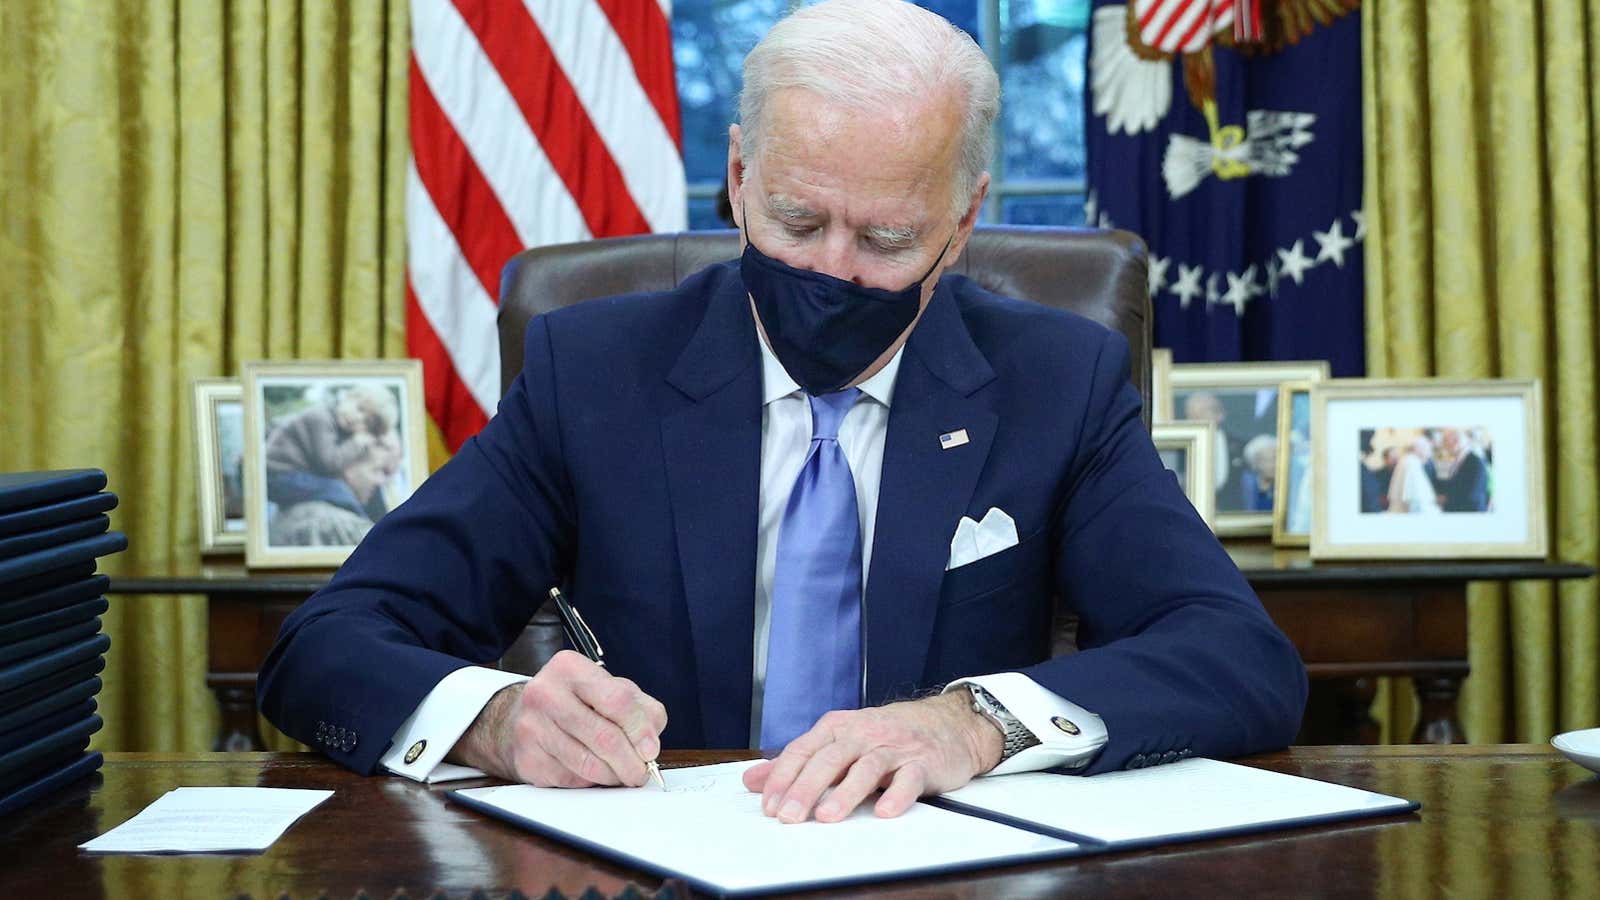 U.S. President Joe Biden signs executive orders in the Oval Office of the White House in Washington, after his inauguration as the 46th President of…